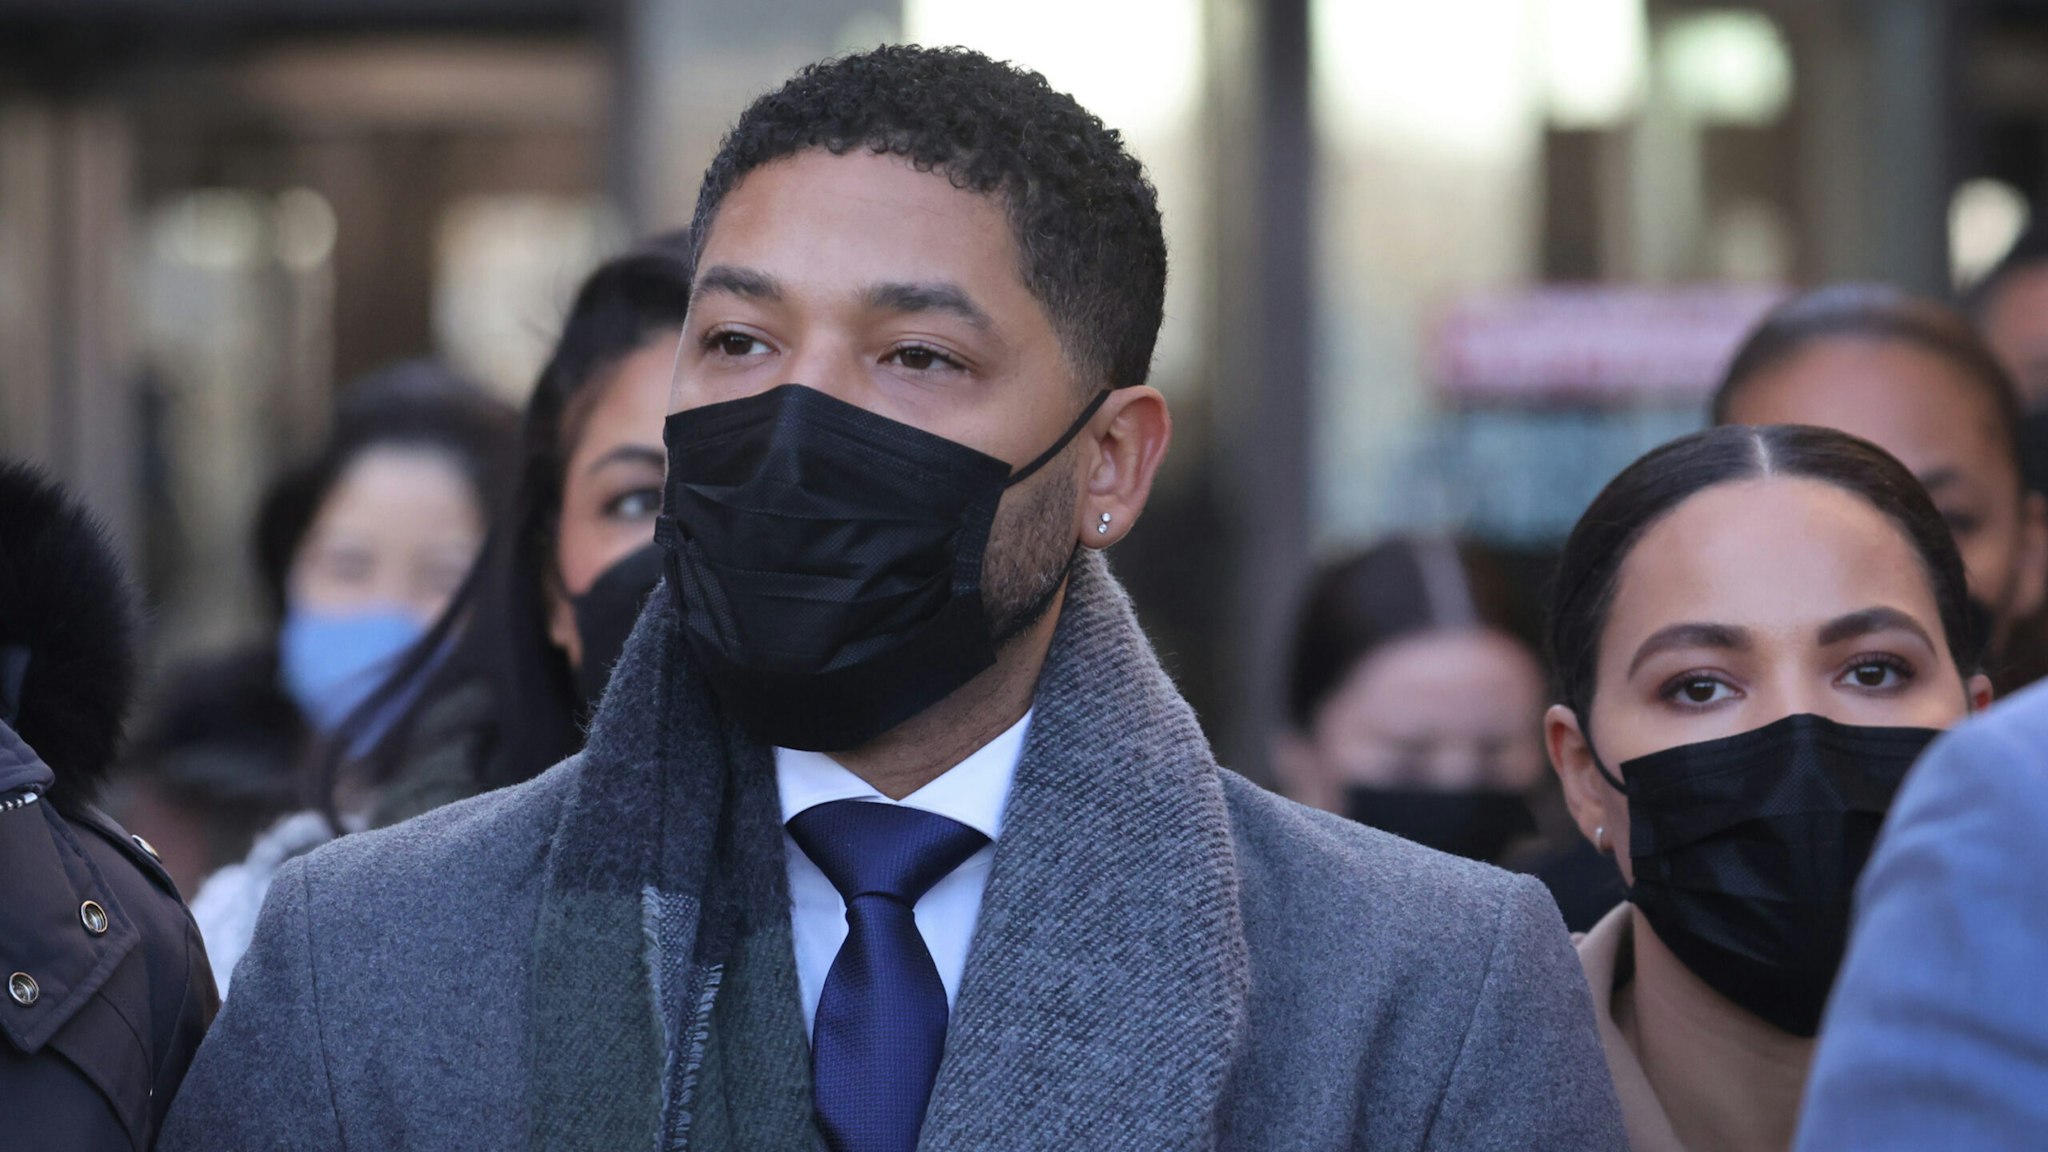 Former "Empire" actor Jussie Smollett leaves the Leighton Criminal Courts Building as the jury begins deliberation during his trial on December 8, 2021 in Chicago, Illinois.